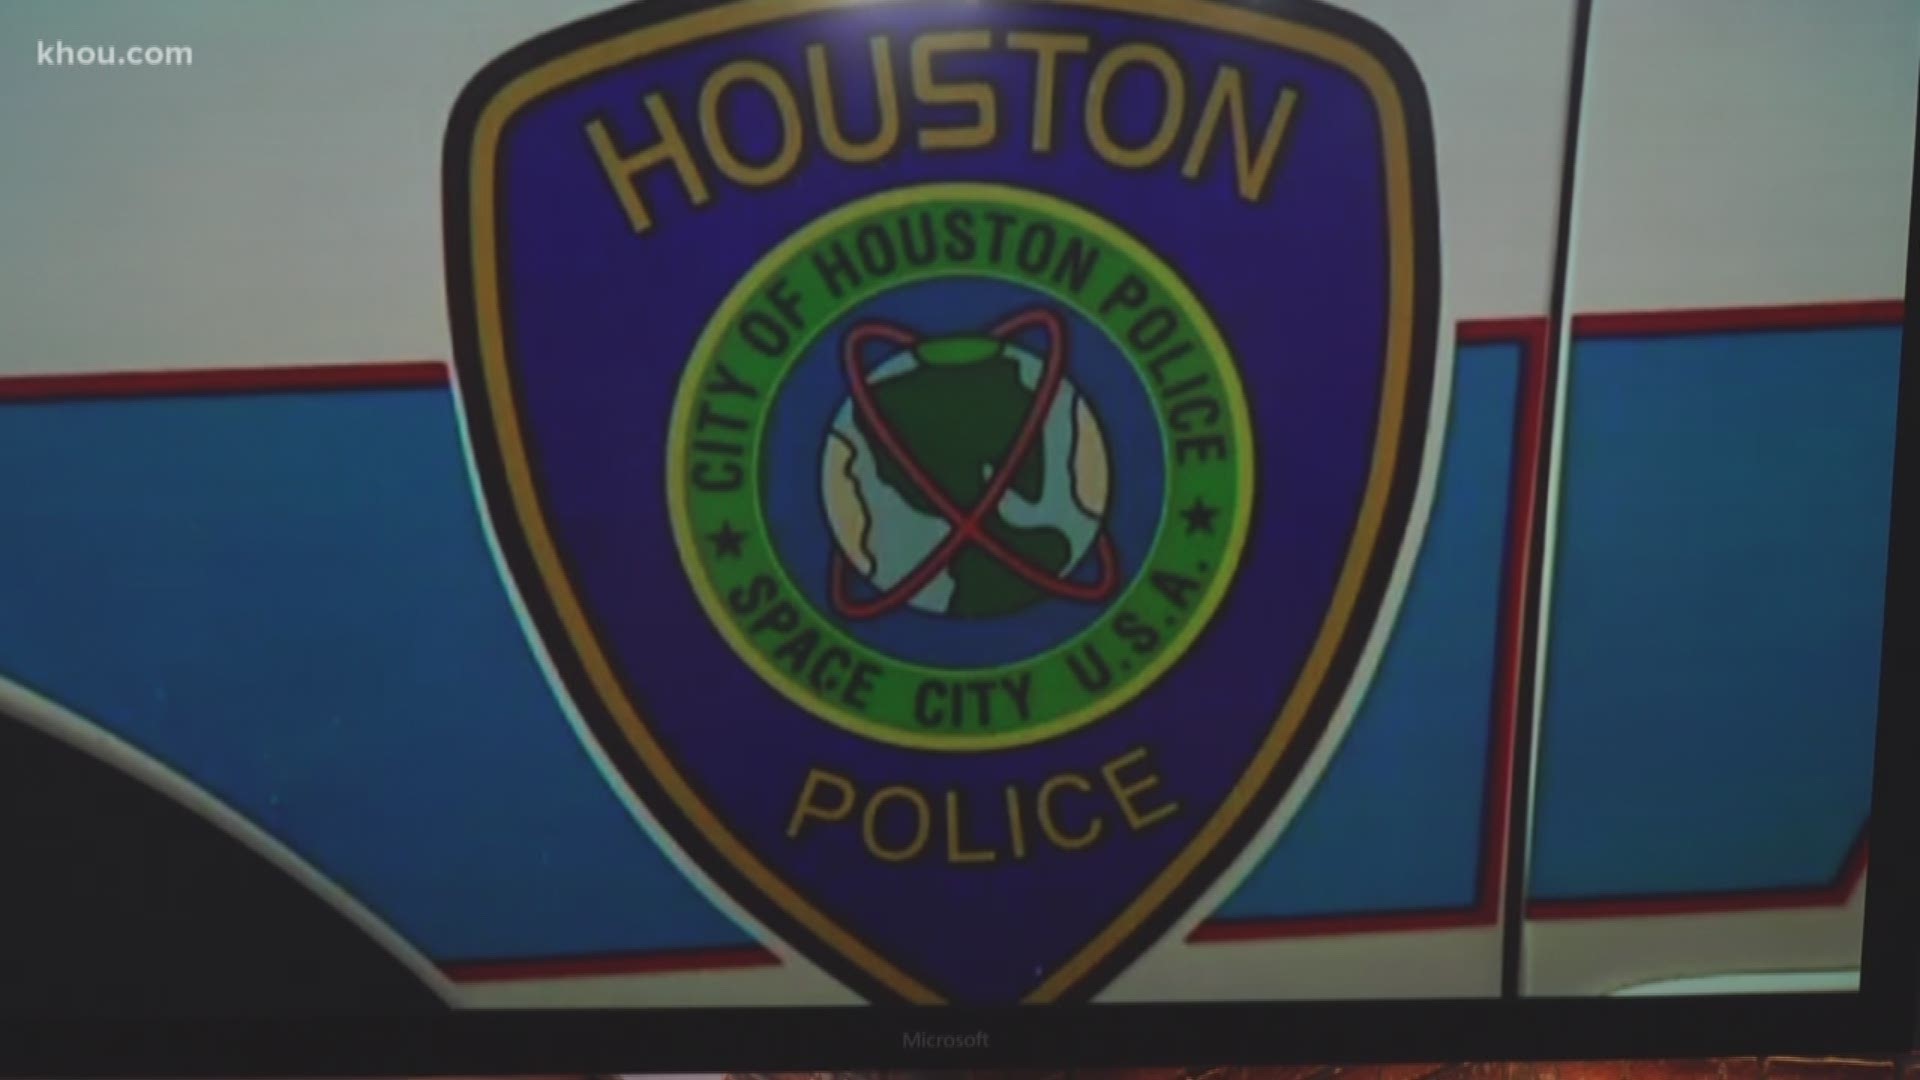 Crime is always going to happen in a city as large as Houston, but Mayor Sylvester Turner has a goal to make it the safest city in the nation.